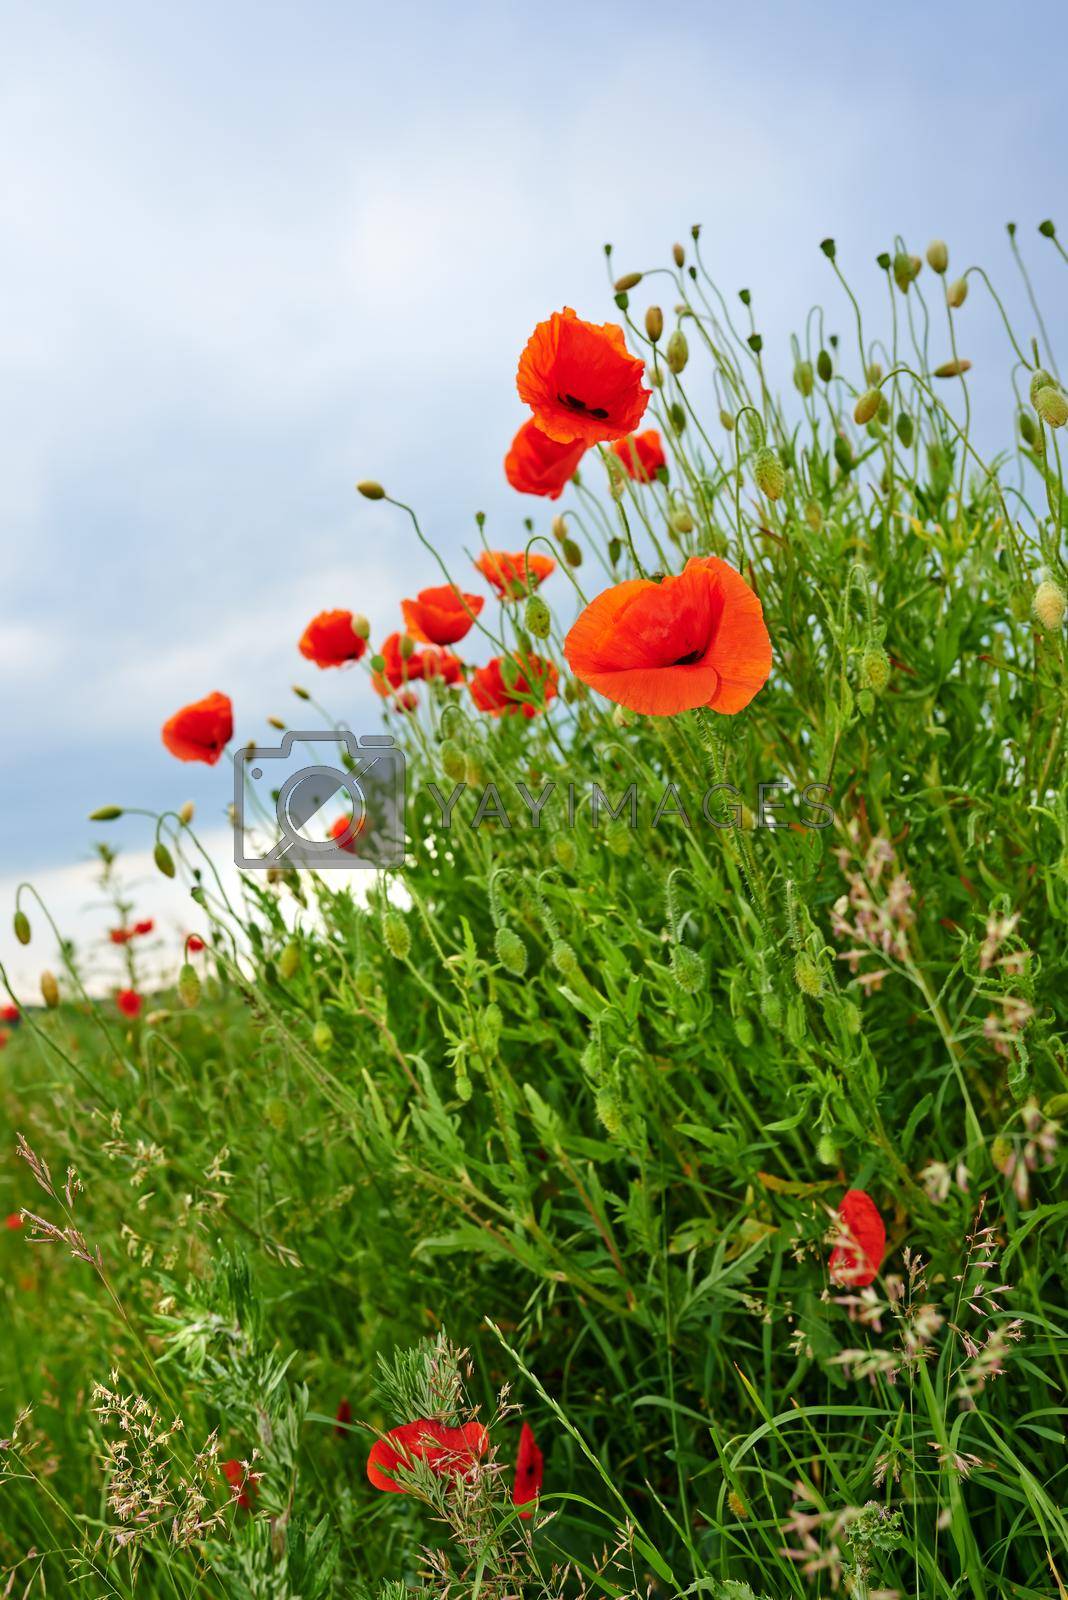 Poppies blooming in the countryside. Poppies blooming in the countryside - Denmark